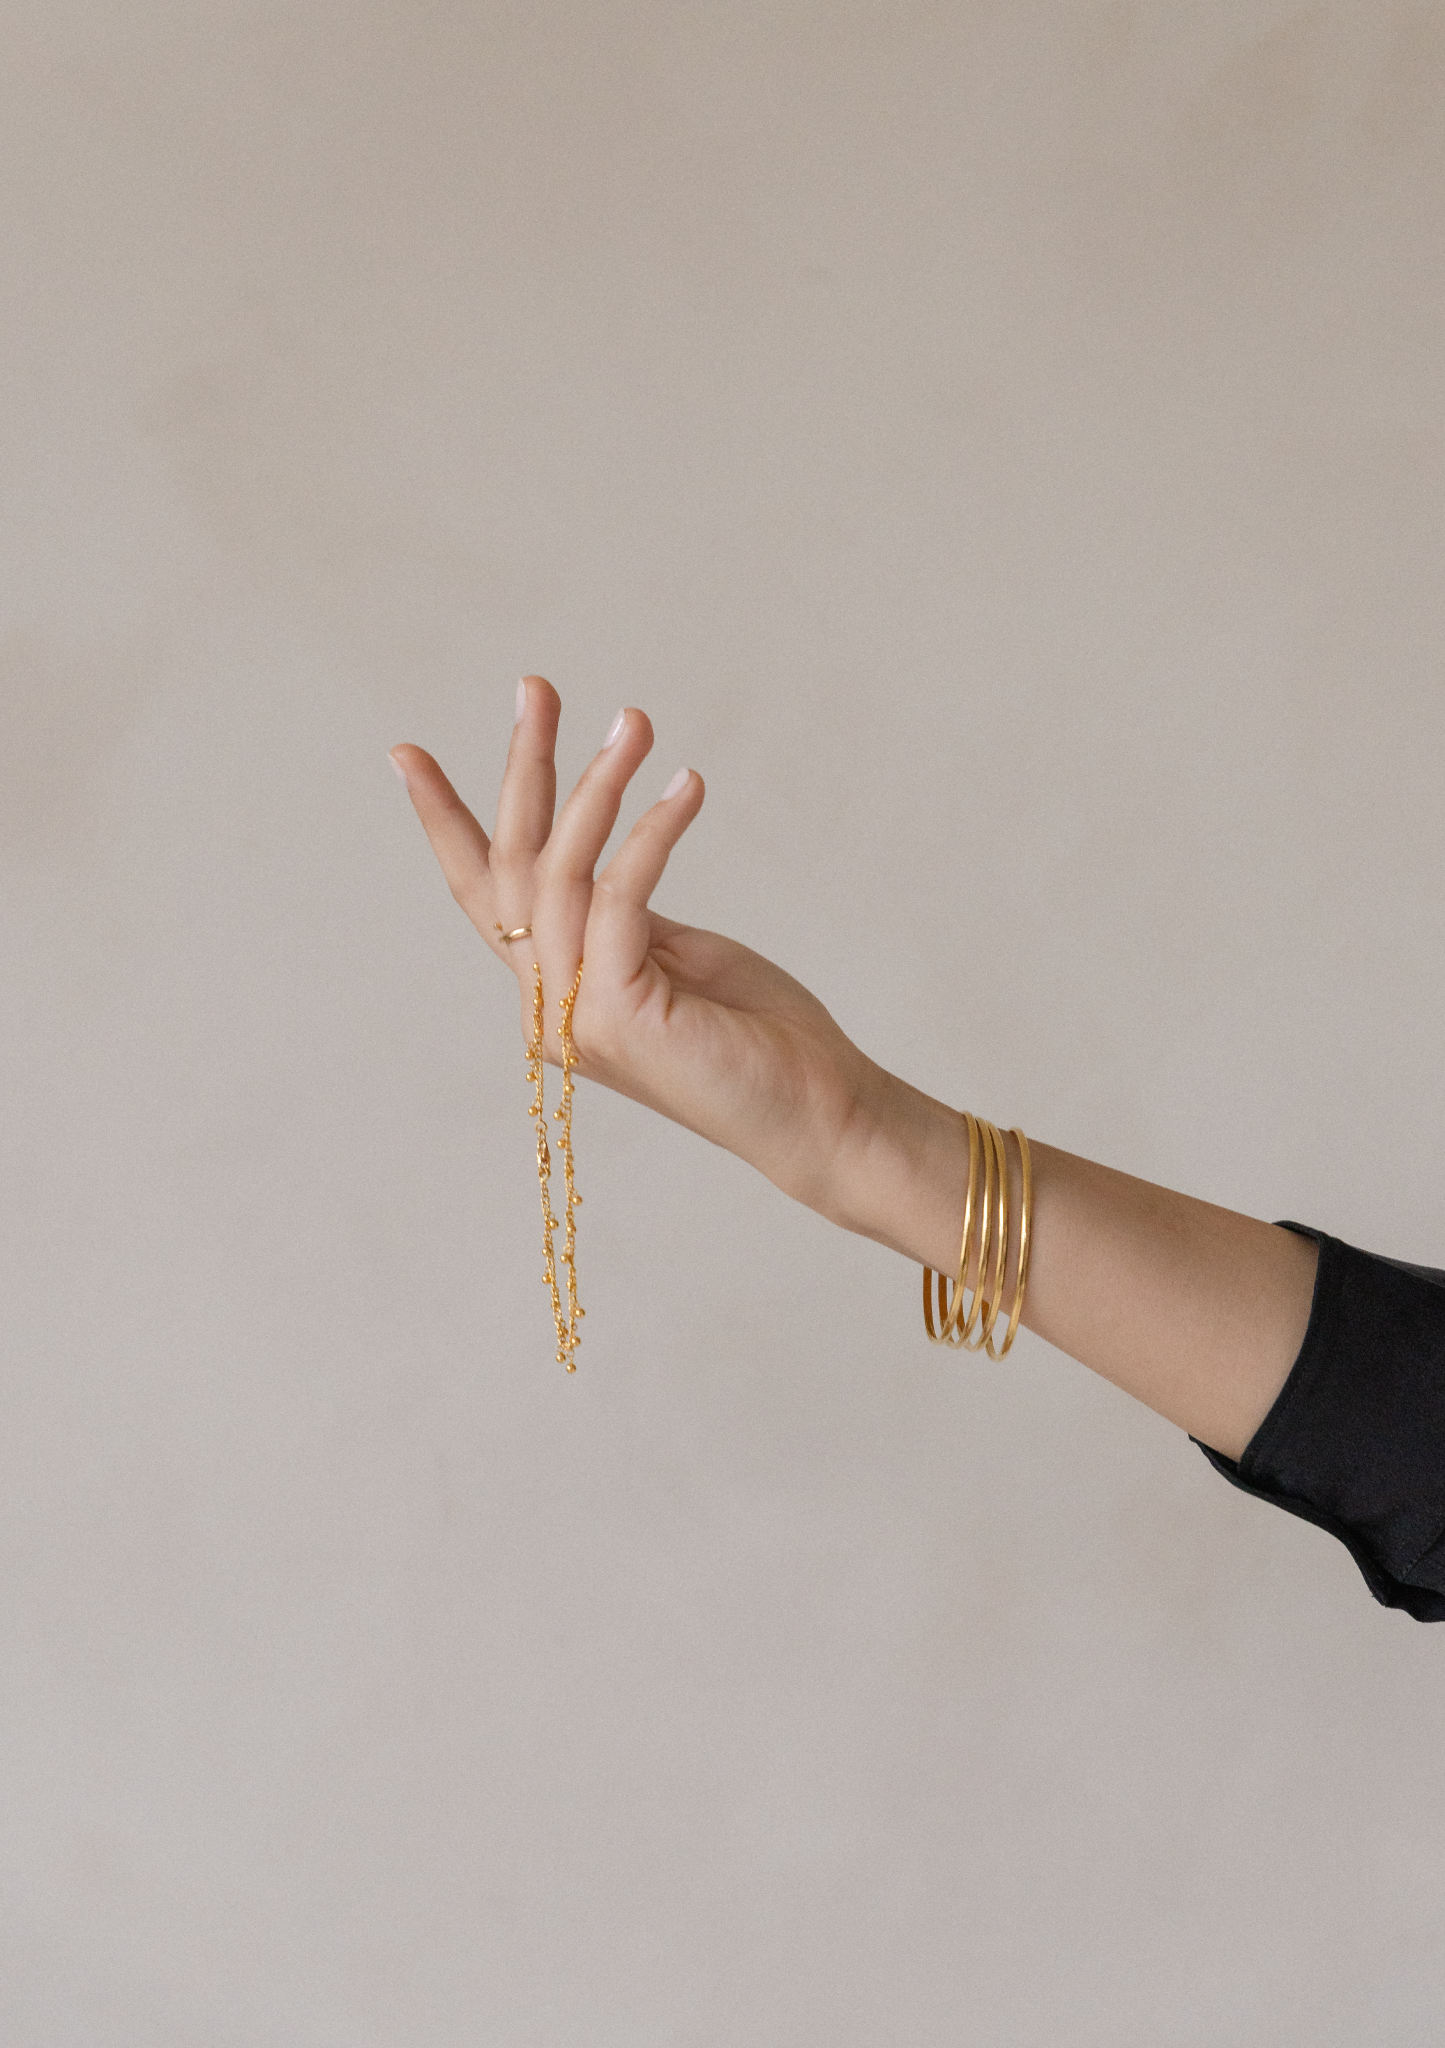 Hand model with gold